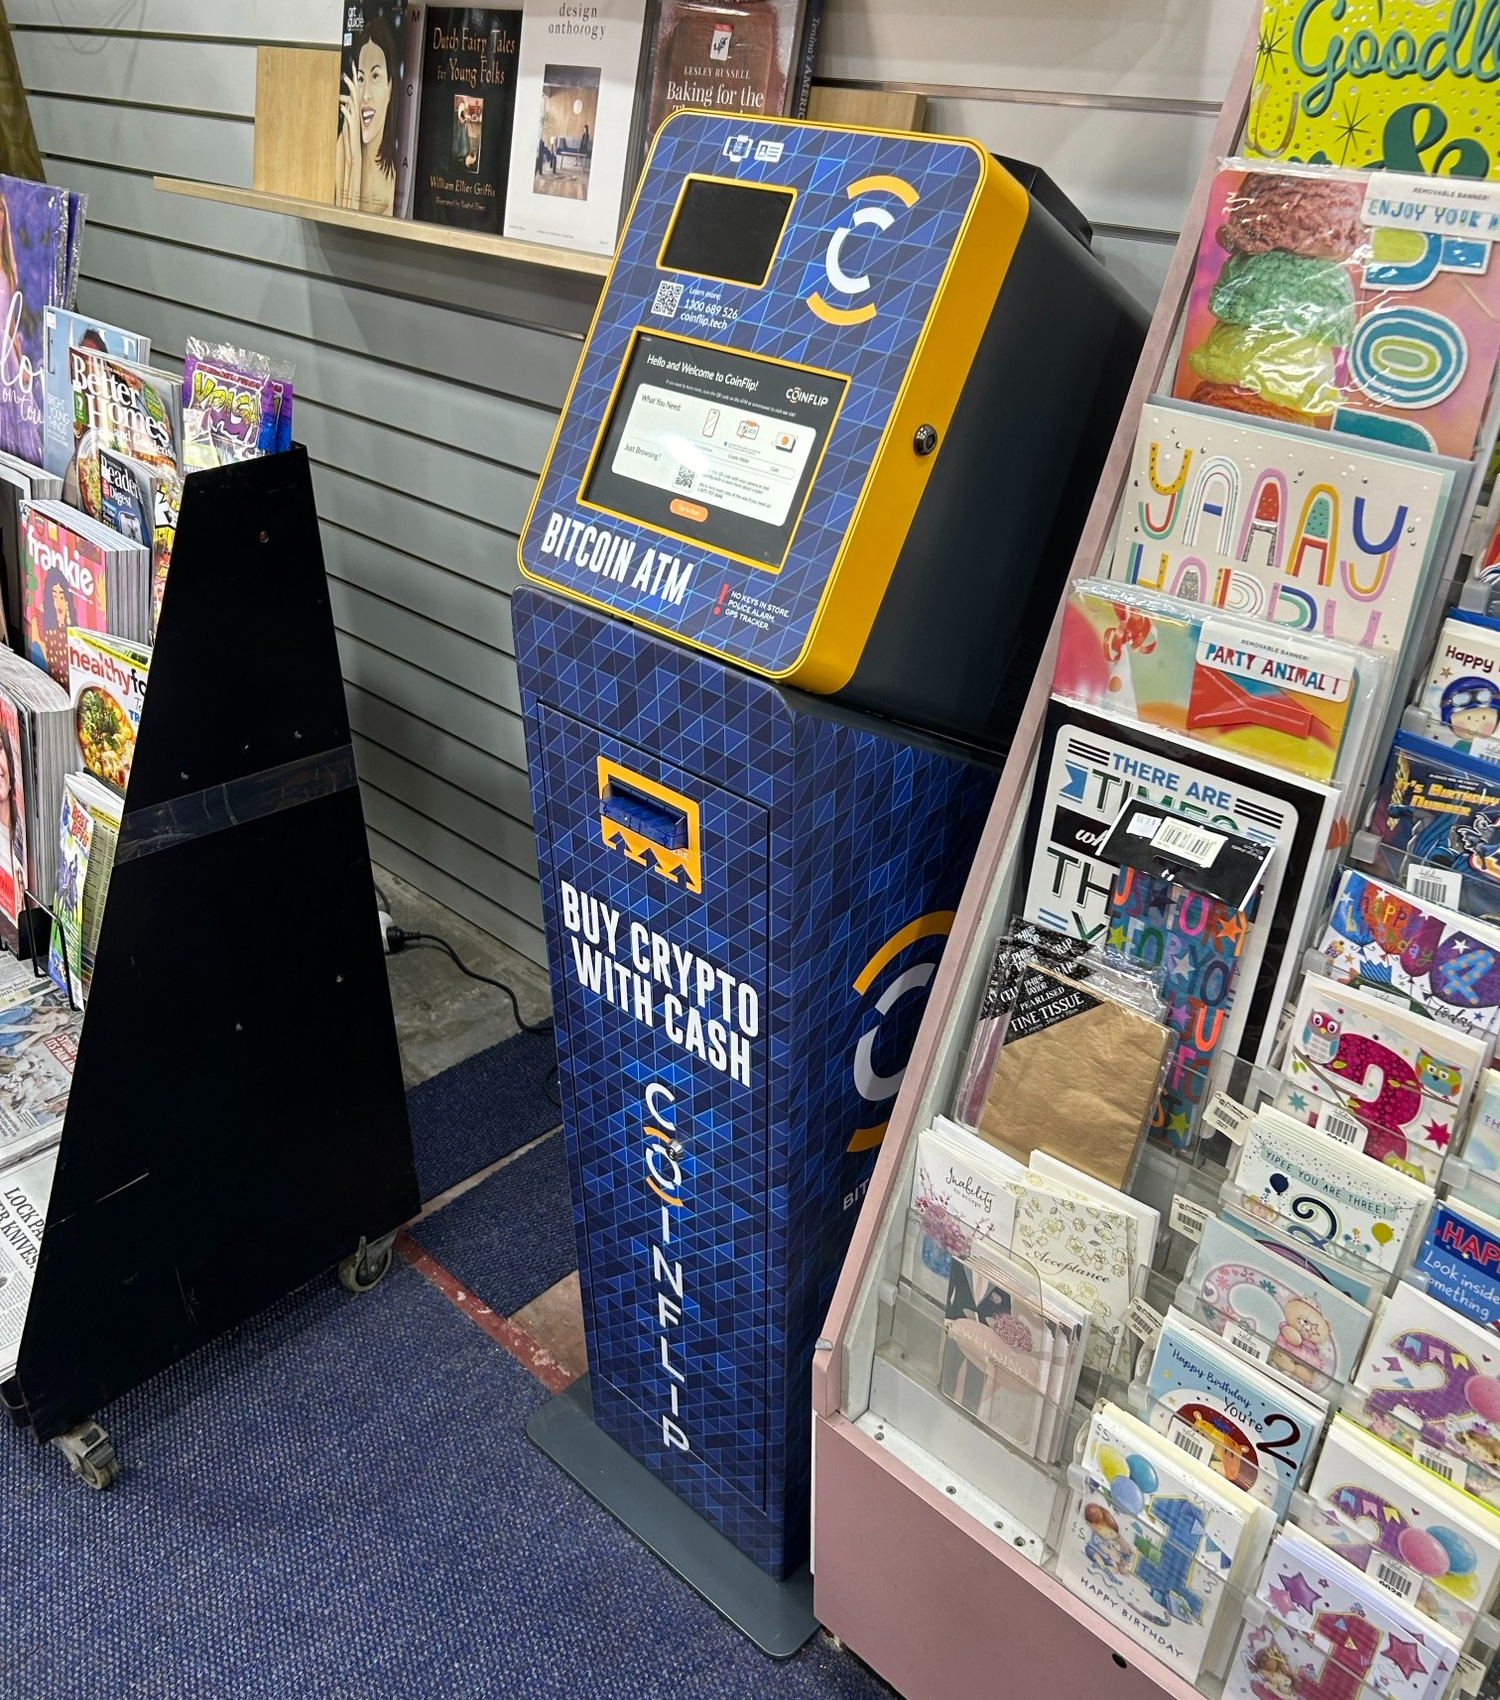 CoinFlip Bitcoin ATM - Meadowbank Newsagency (Meadowbank) Meadowbank (13) 0068 9526